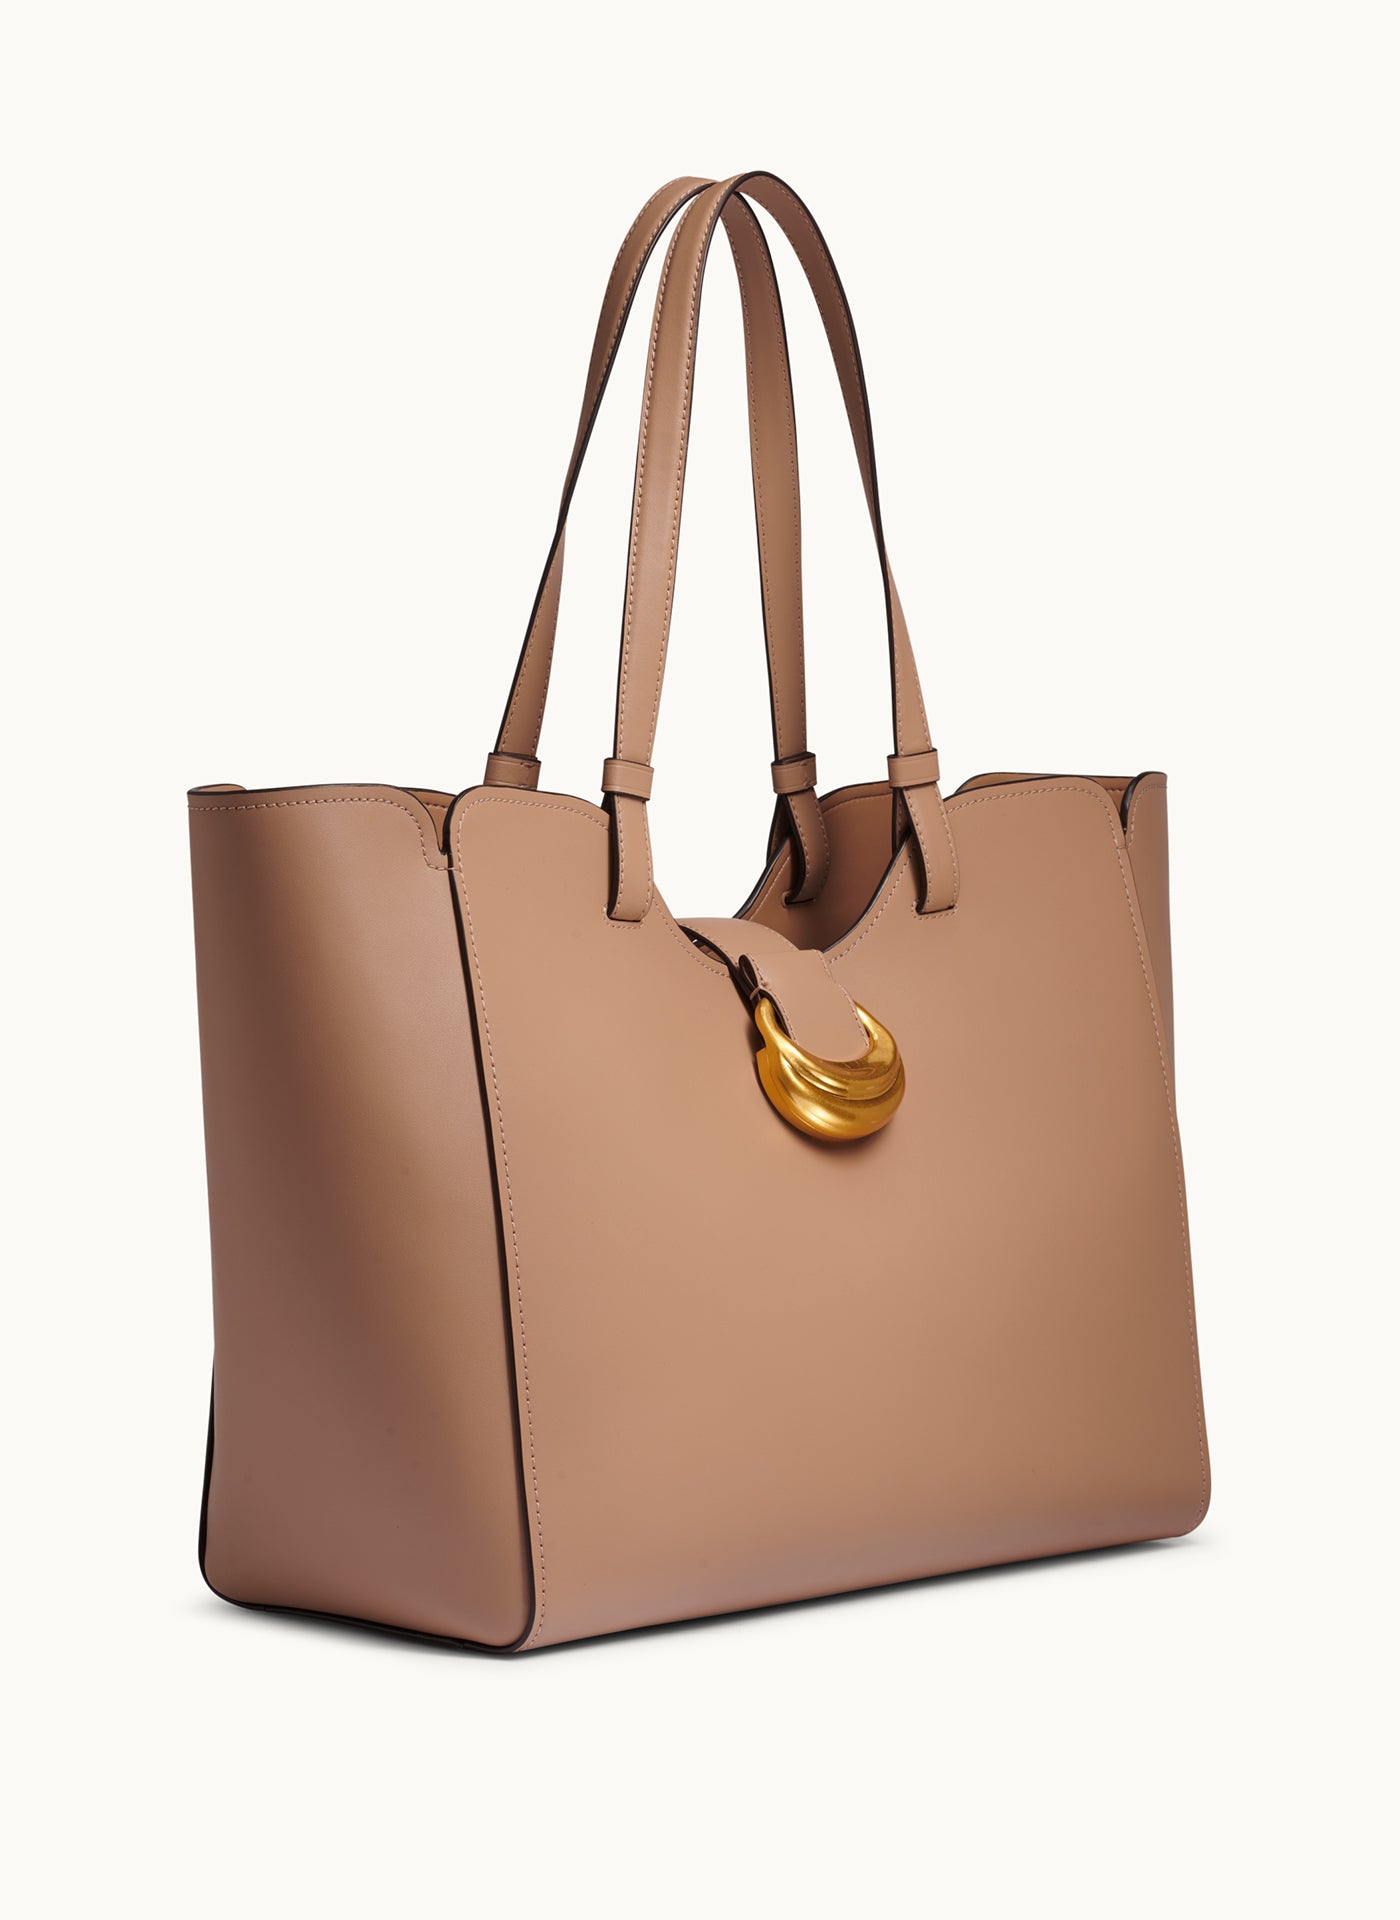 VALLEY STREAM LARGE TOTE